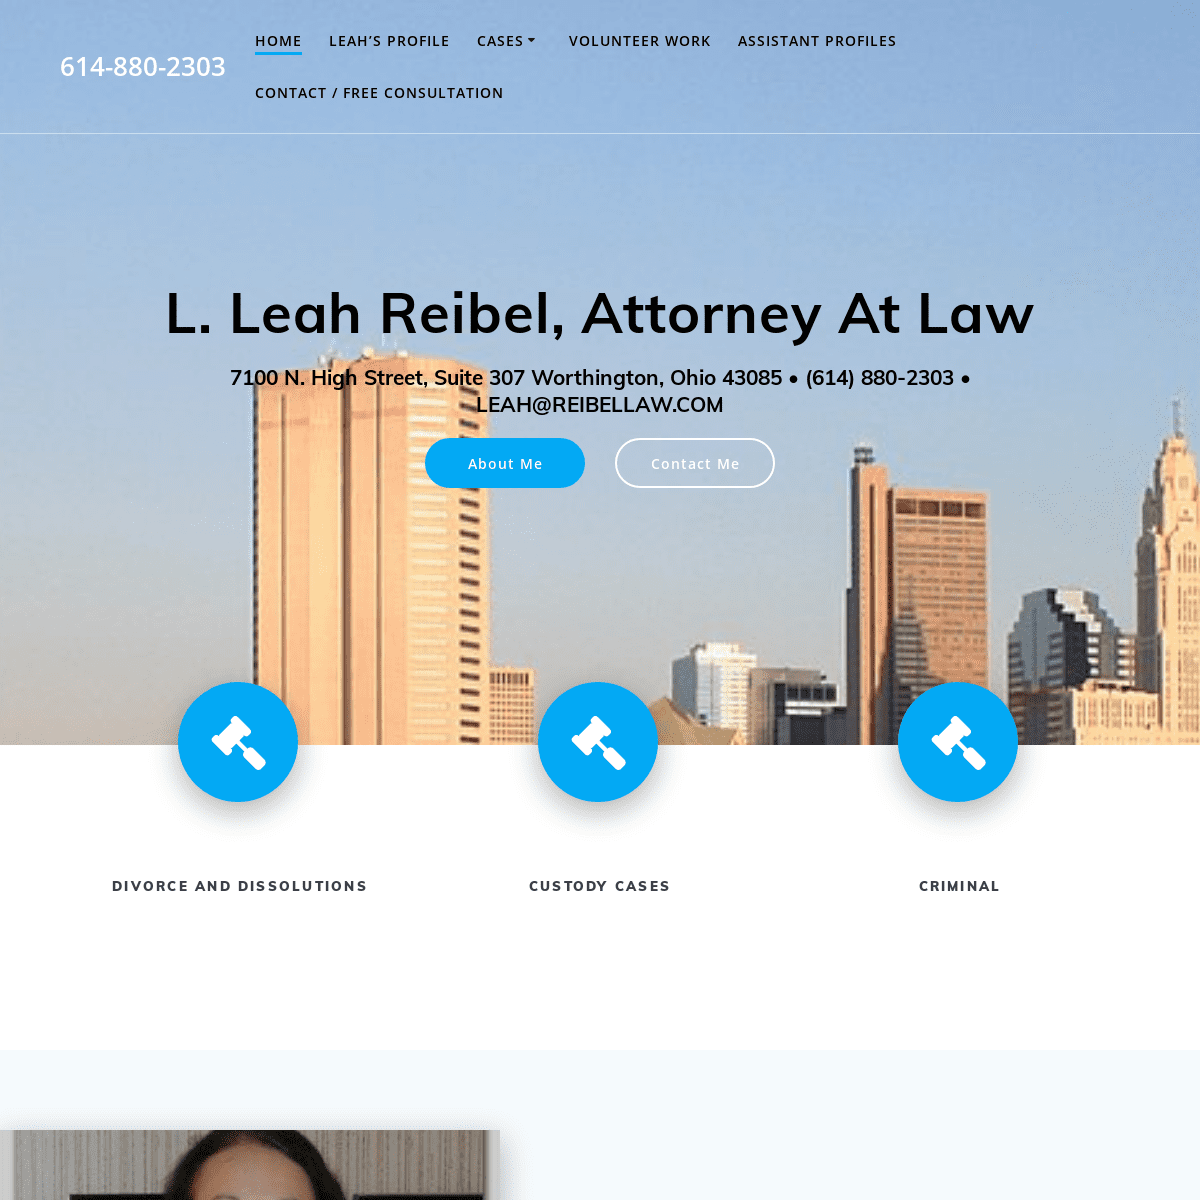 A complete backup of https://reibellaw.com